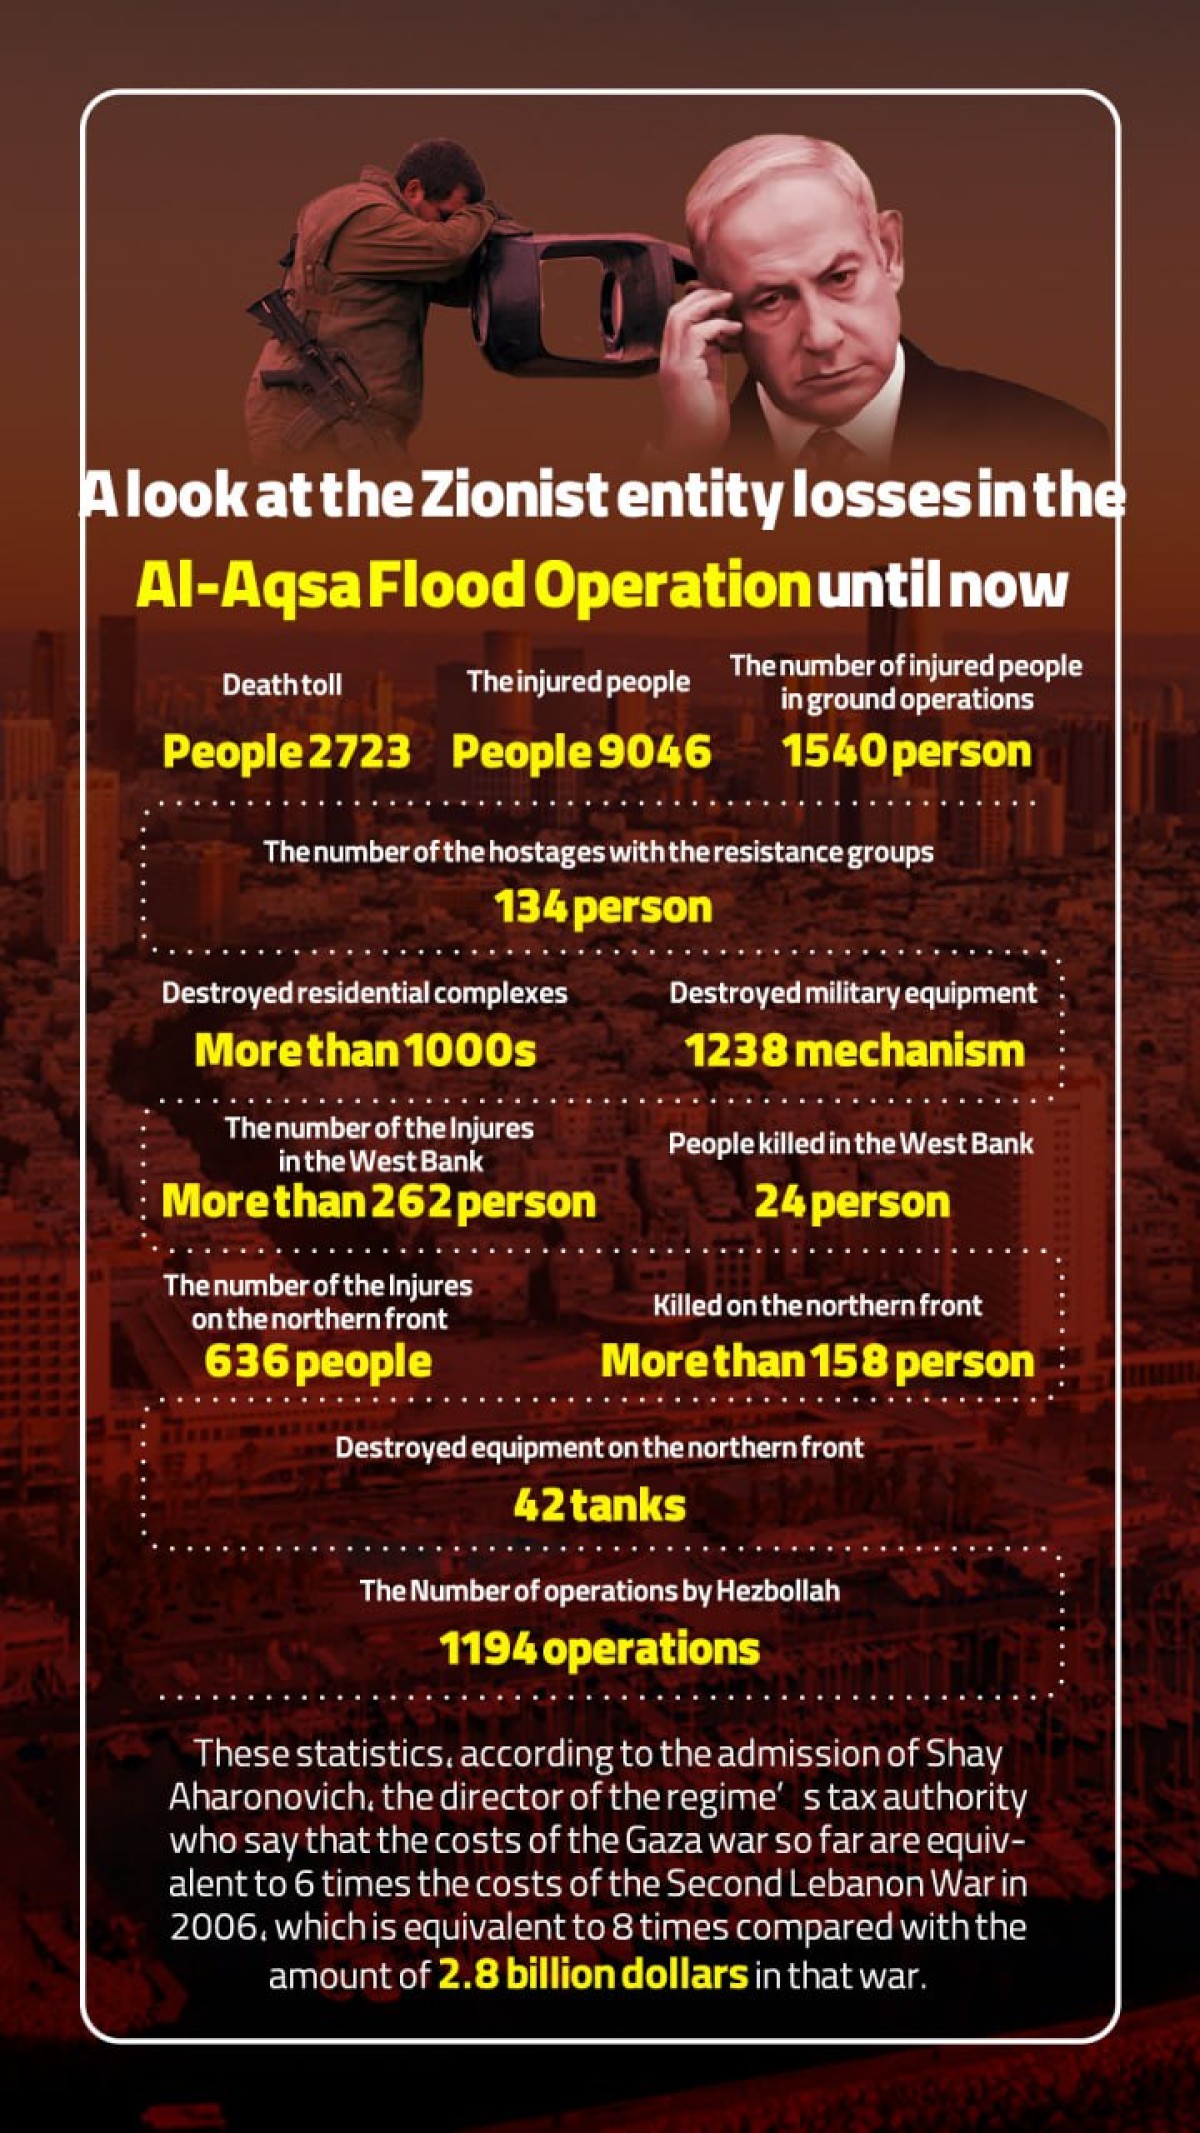 A look at the Zionist entity losses in the Al-Aqsa Flood Operation until now